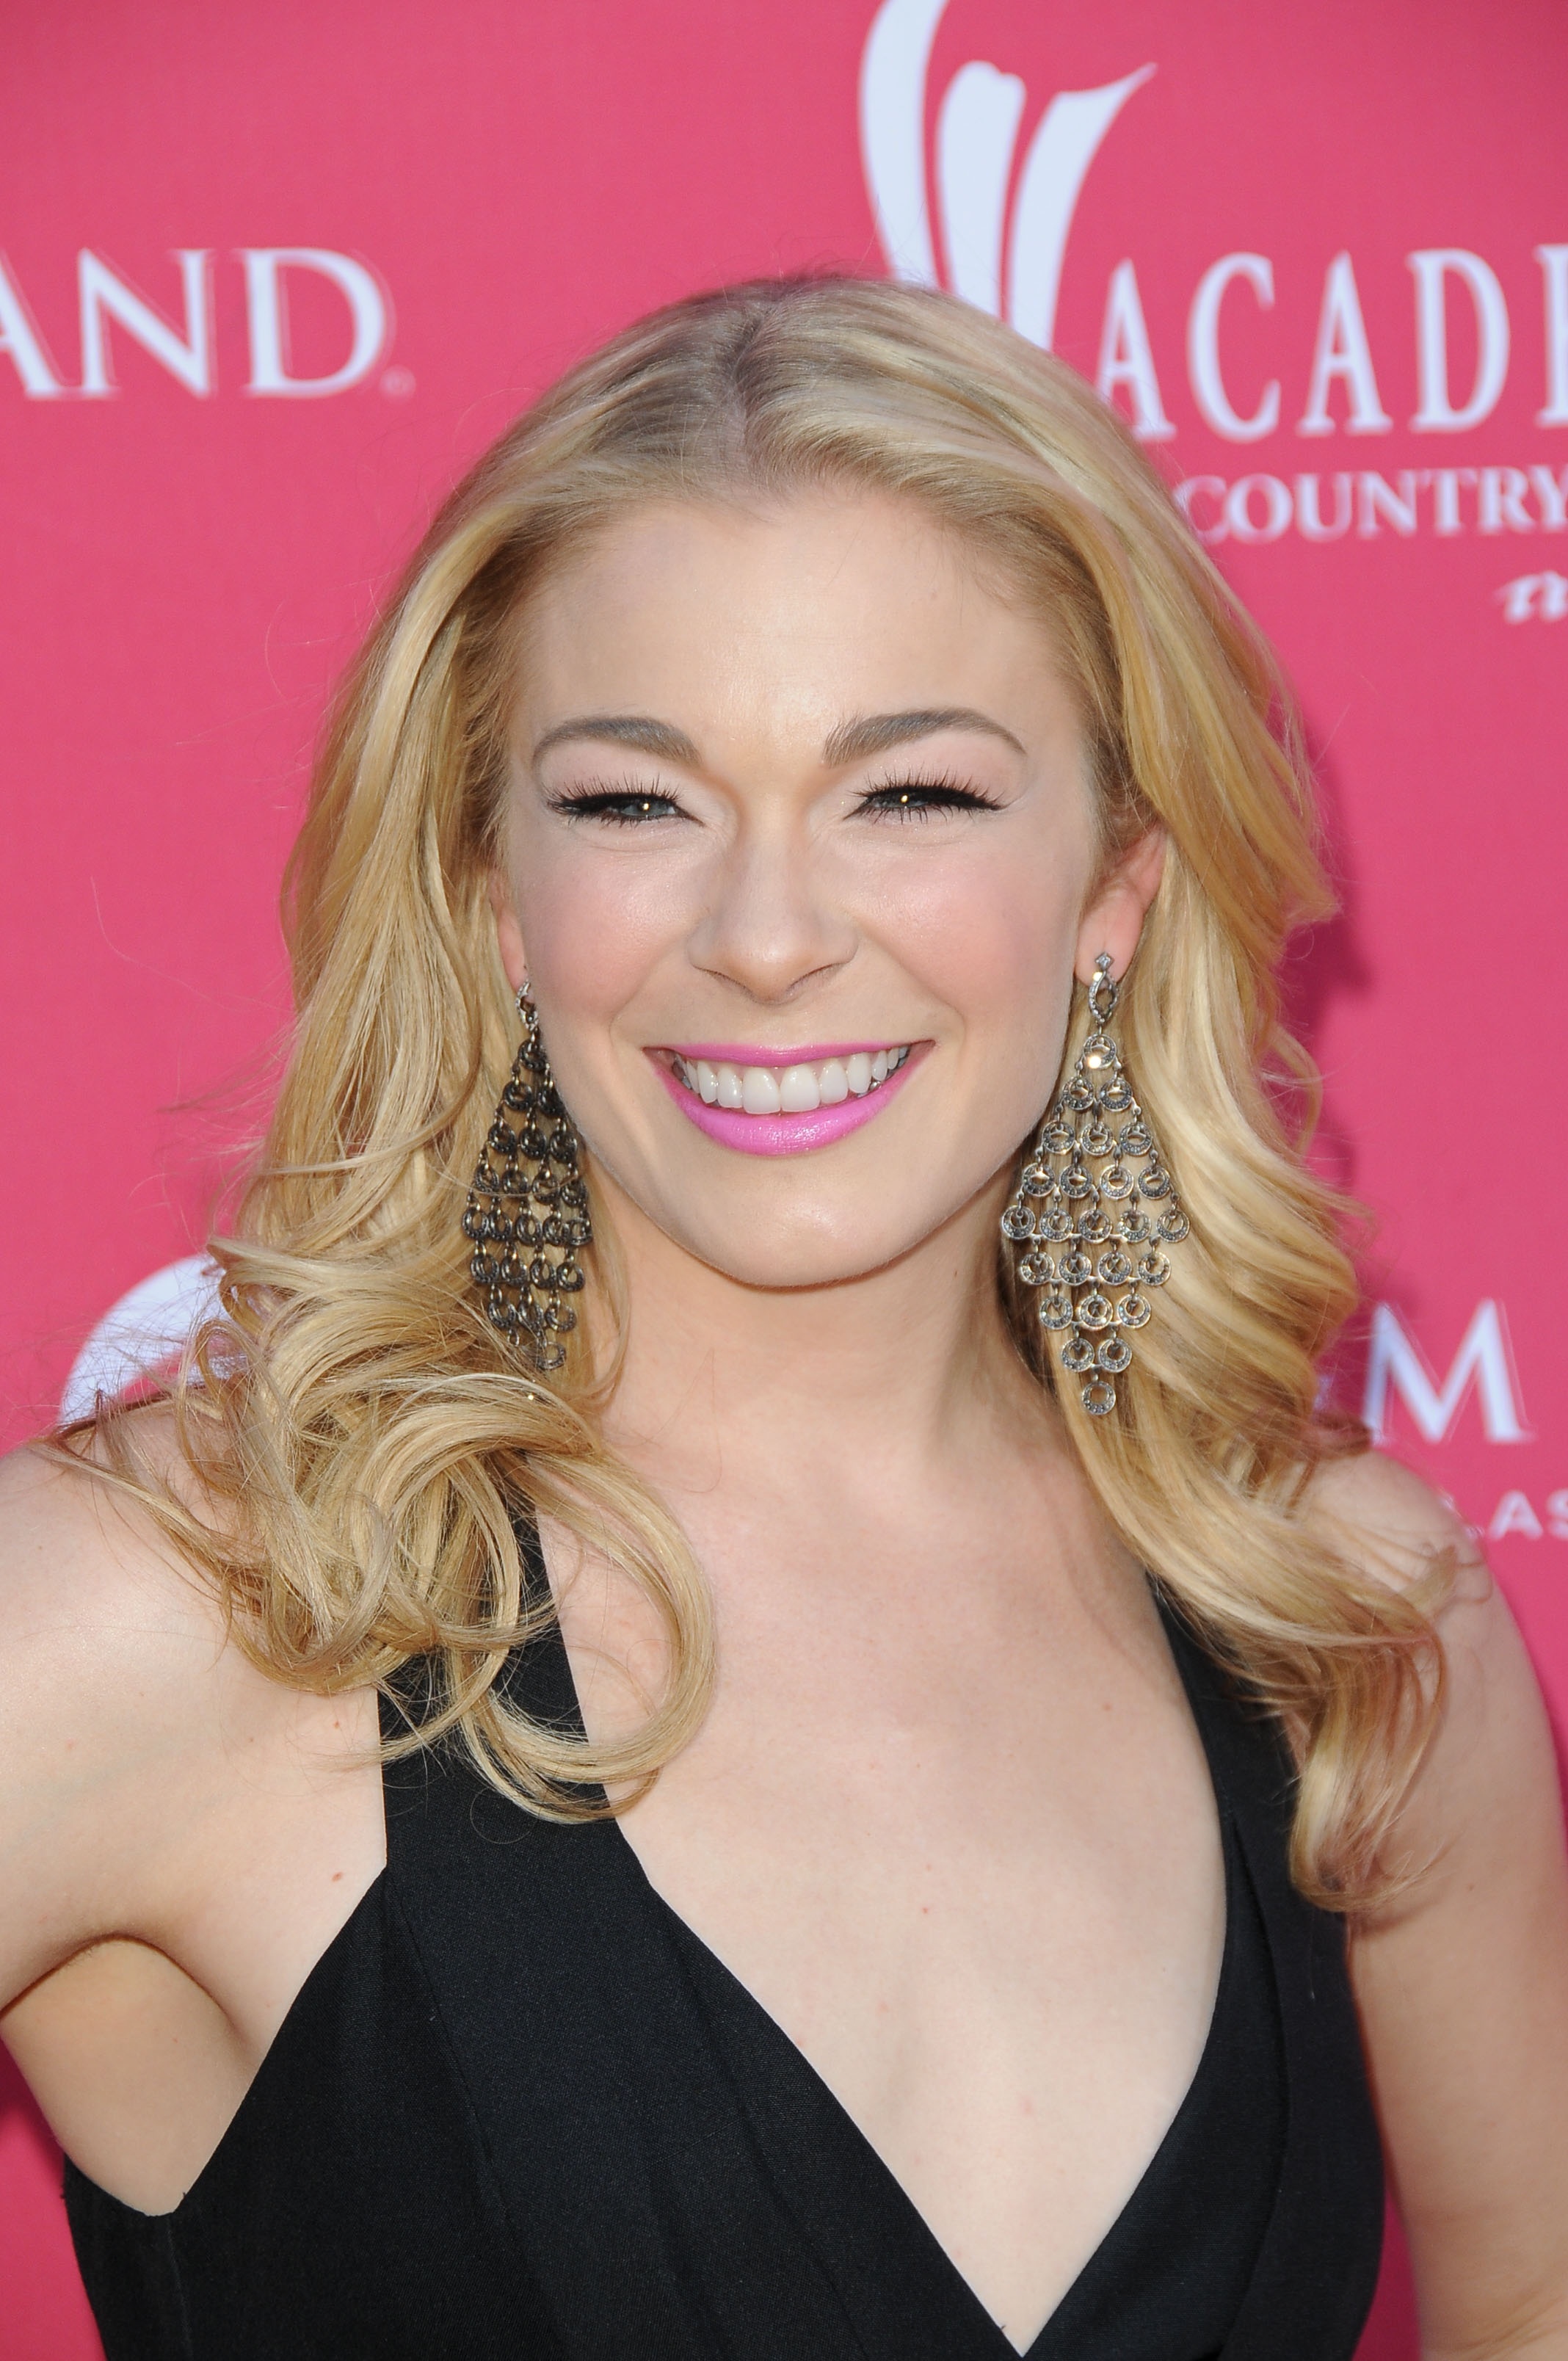 <p><a href="https://www.wonderwall.com/celebrity/profiles/overview/leann-rimes-713.article">LeAnn Rimes</a> (pictured in 2009) won us over with her stunning vocals on hits like "How Do I Live" and "Can't Fight the Moonlight." She emerged on the scene as a bright-eyed, baby-faced teen during the '90s, but she now looks noticeably different.</p>